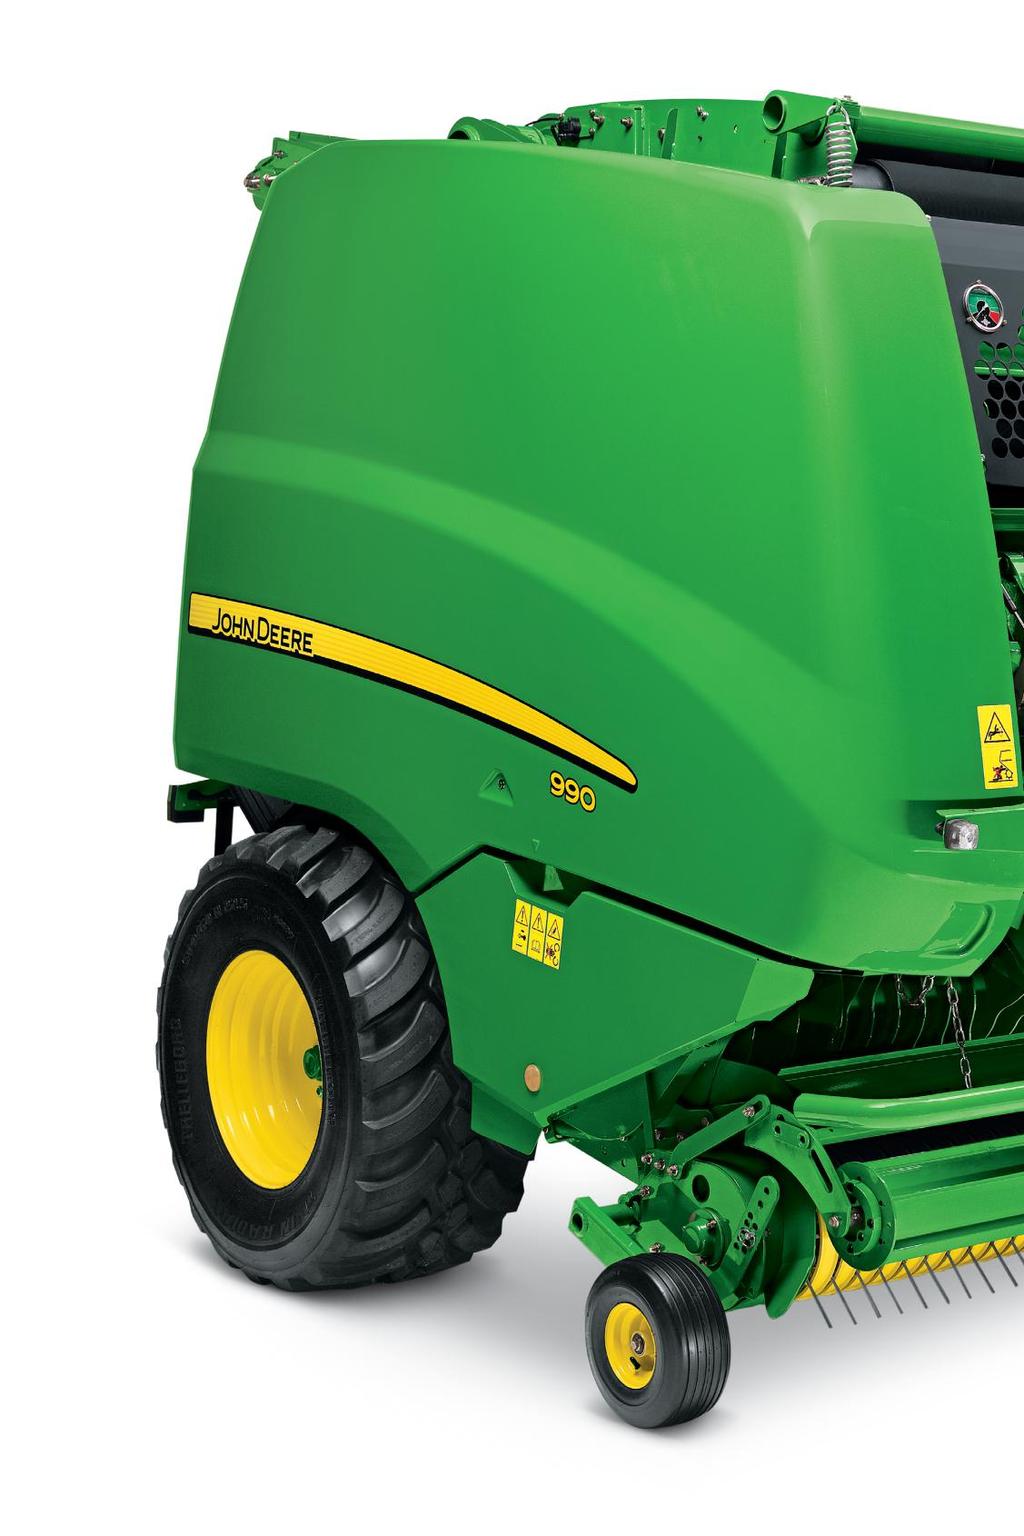 Round Balers 900 Series Introducing the New 900 Series Round Balers If you re looking for the ultimate performance in a pre-cutter baler the new 900 Series are your machines.